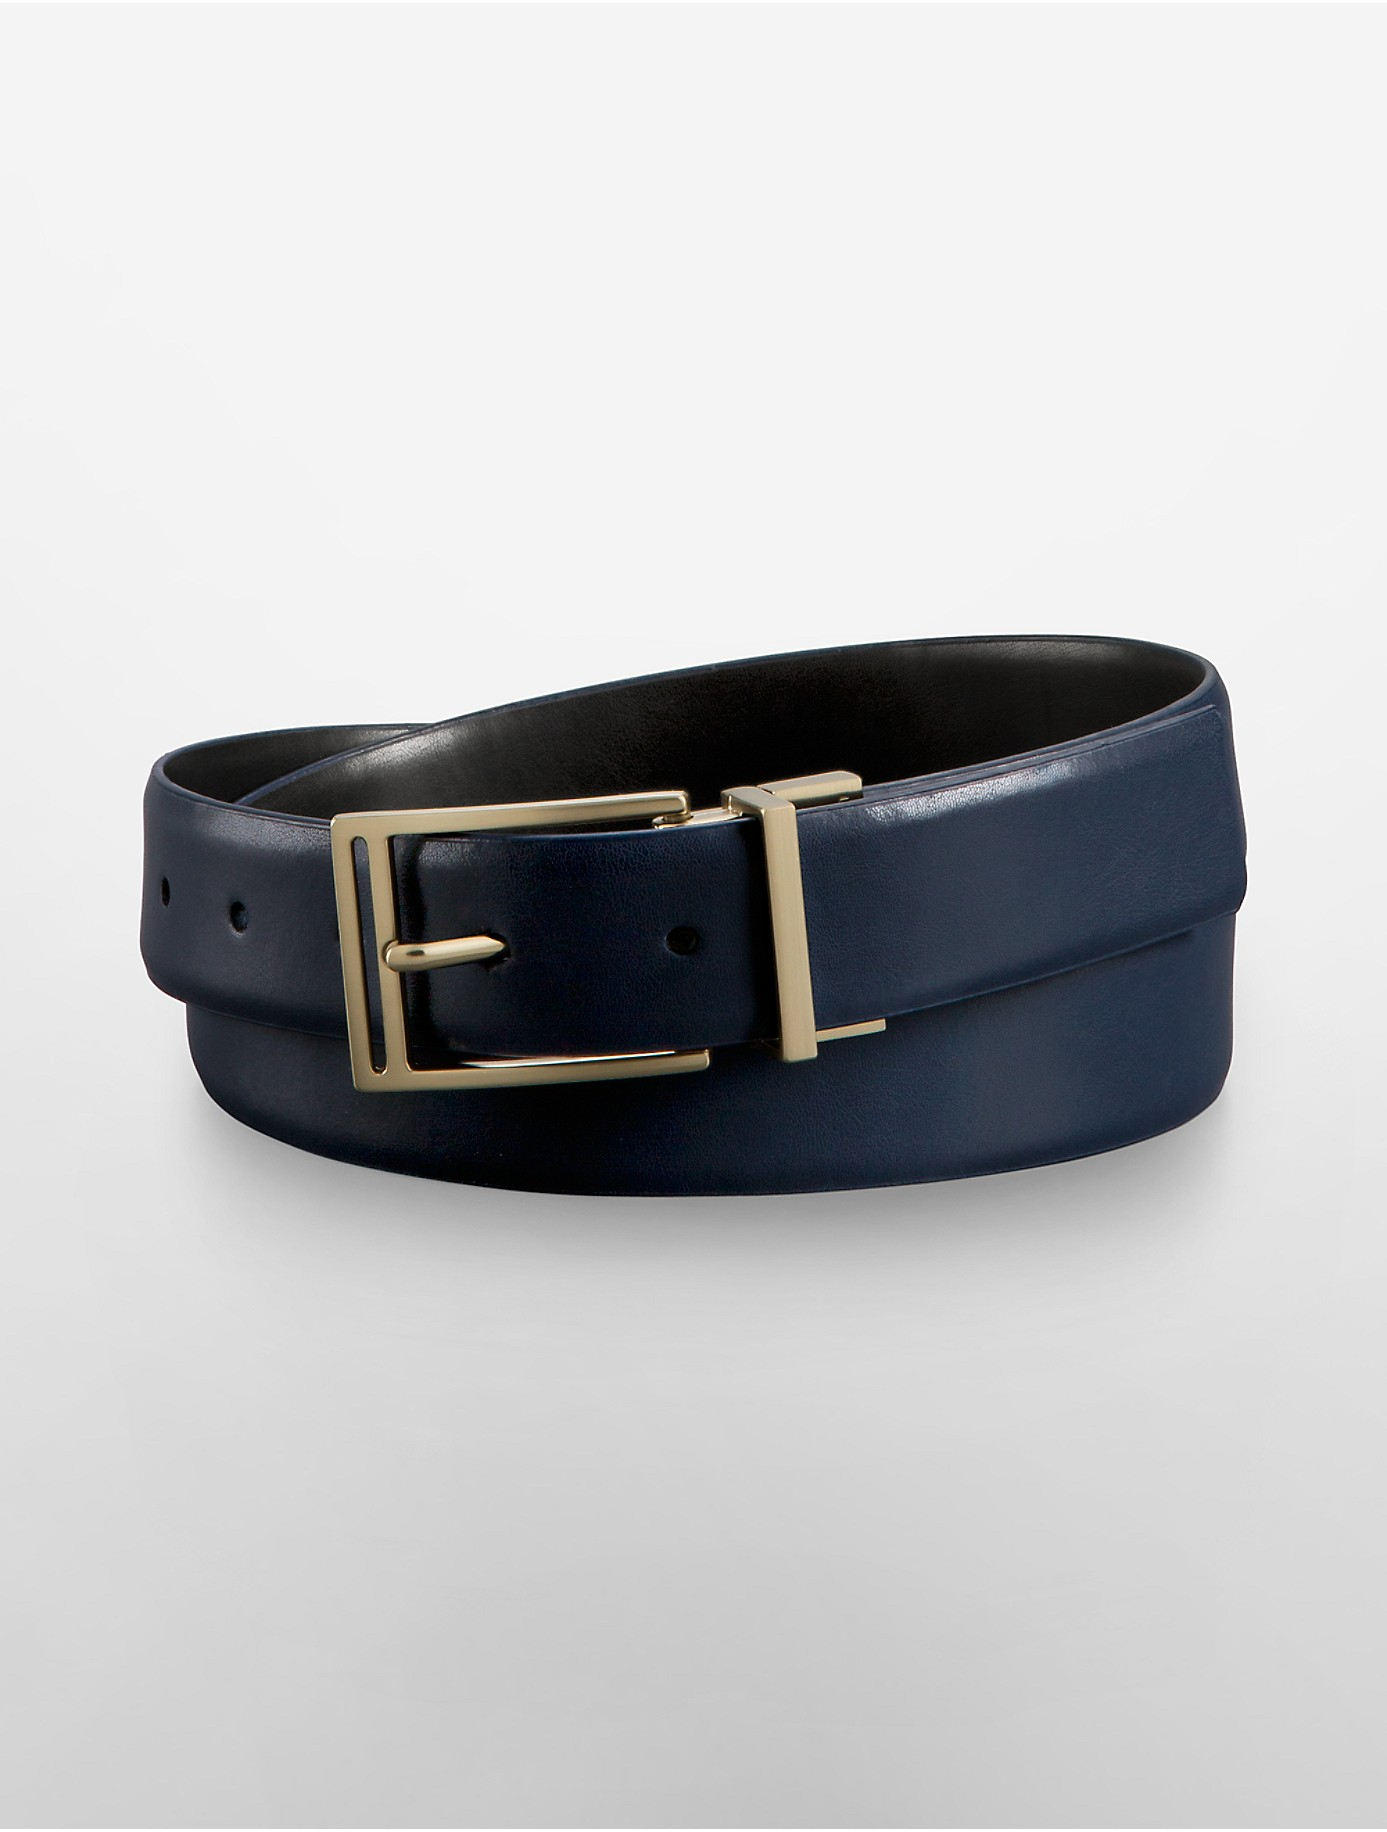 Lyst - Calvin Klein White Label Solid Reversible Leather Belt in Blue ...